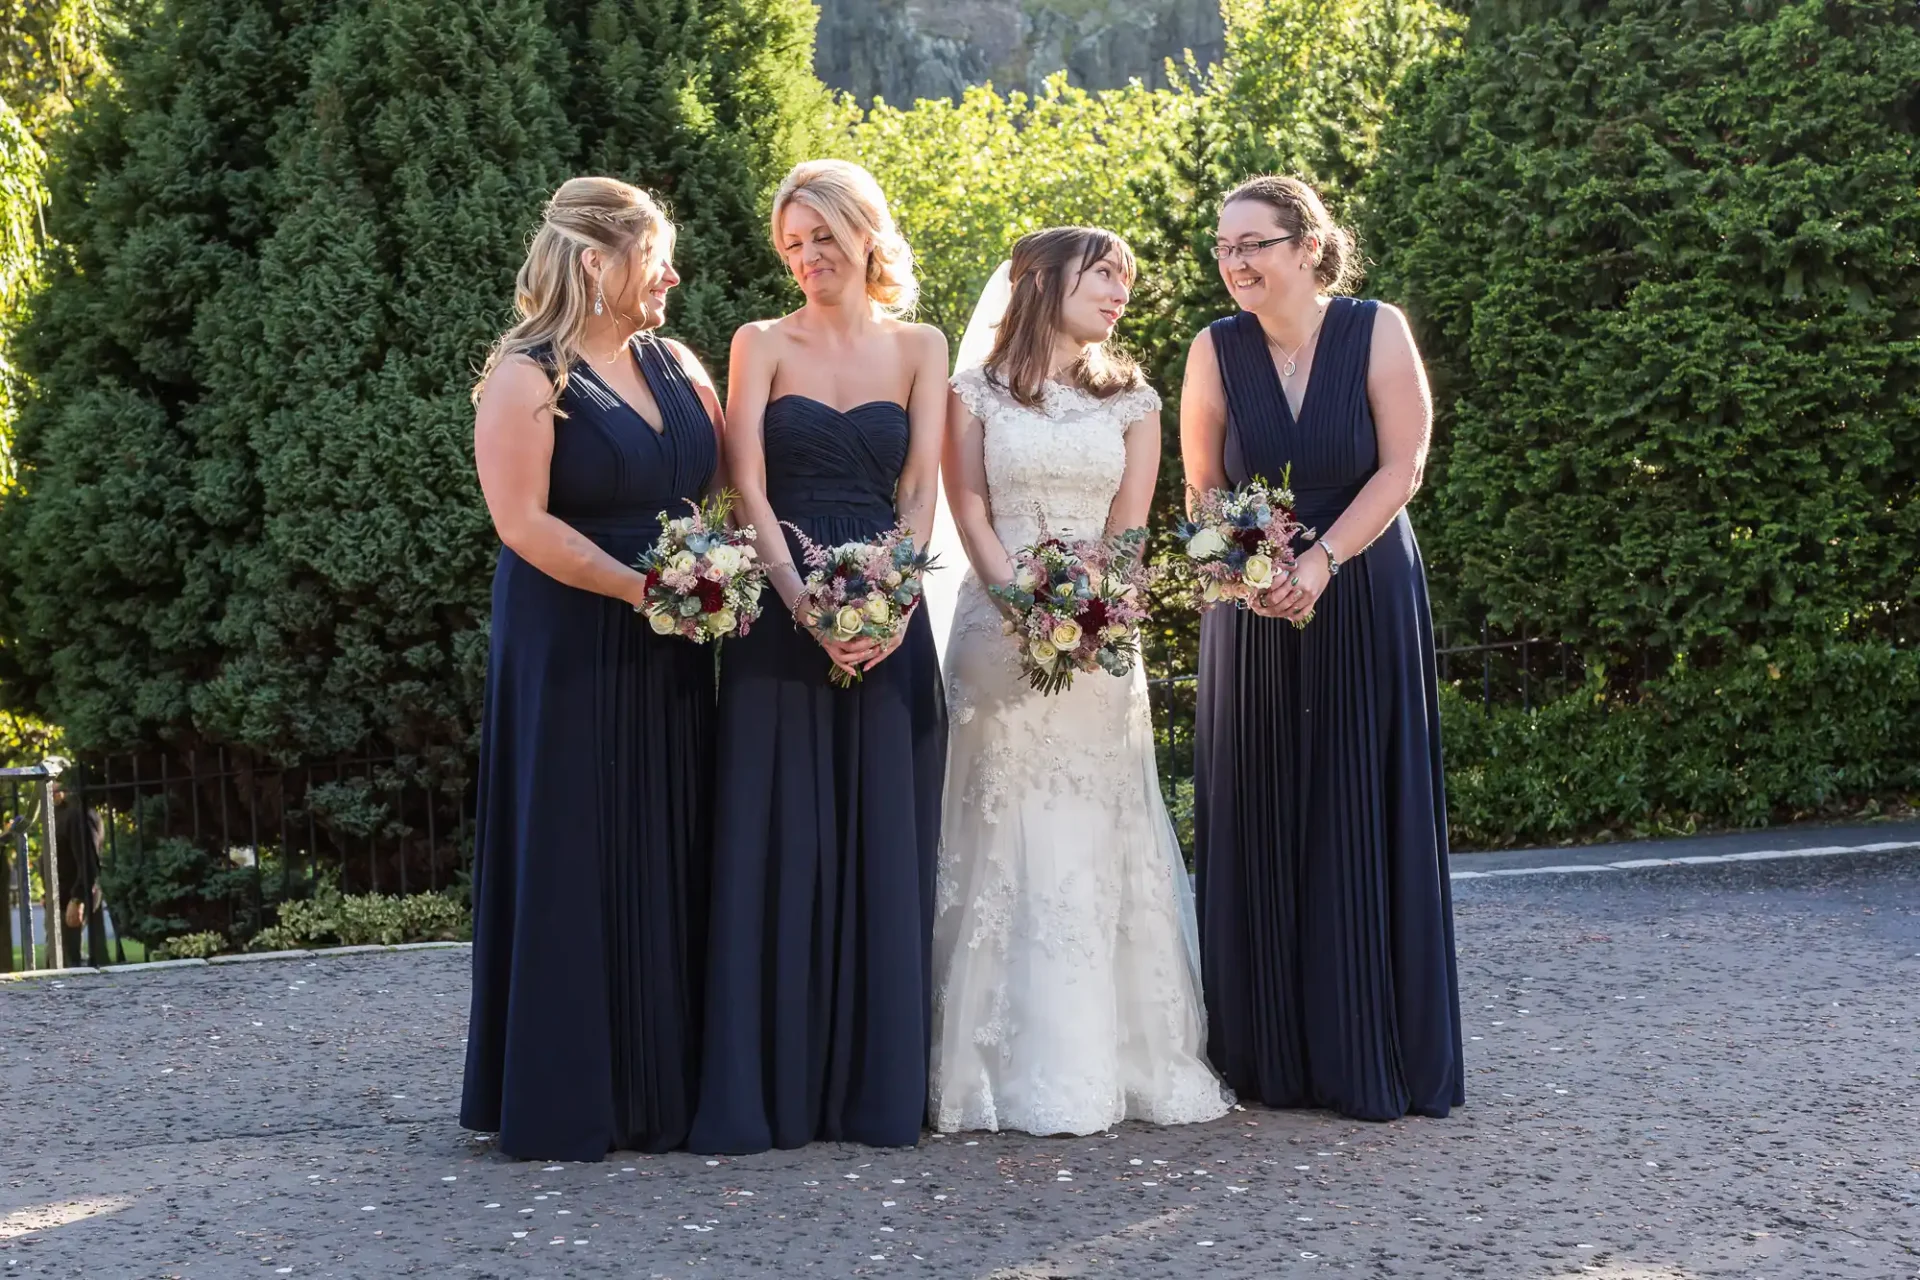 A bride in a white gown stands with three bridesmaids in navy dresses, holding bouquets, in a garden setting.